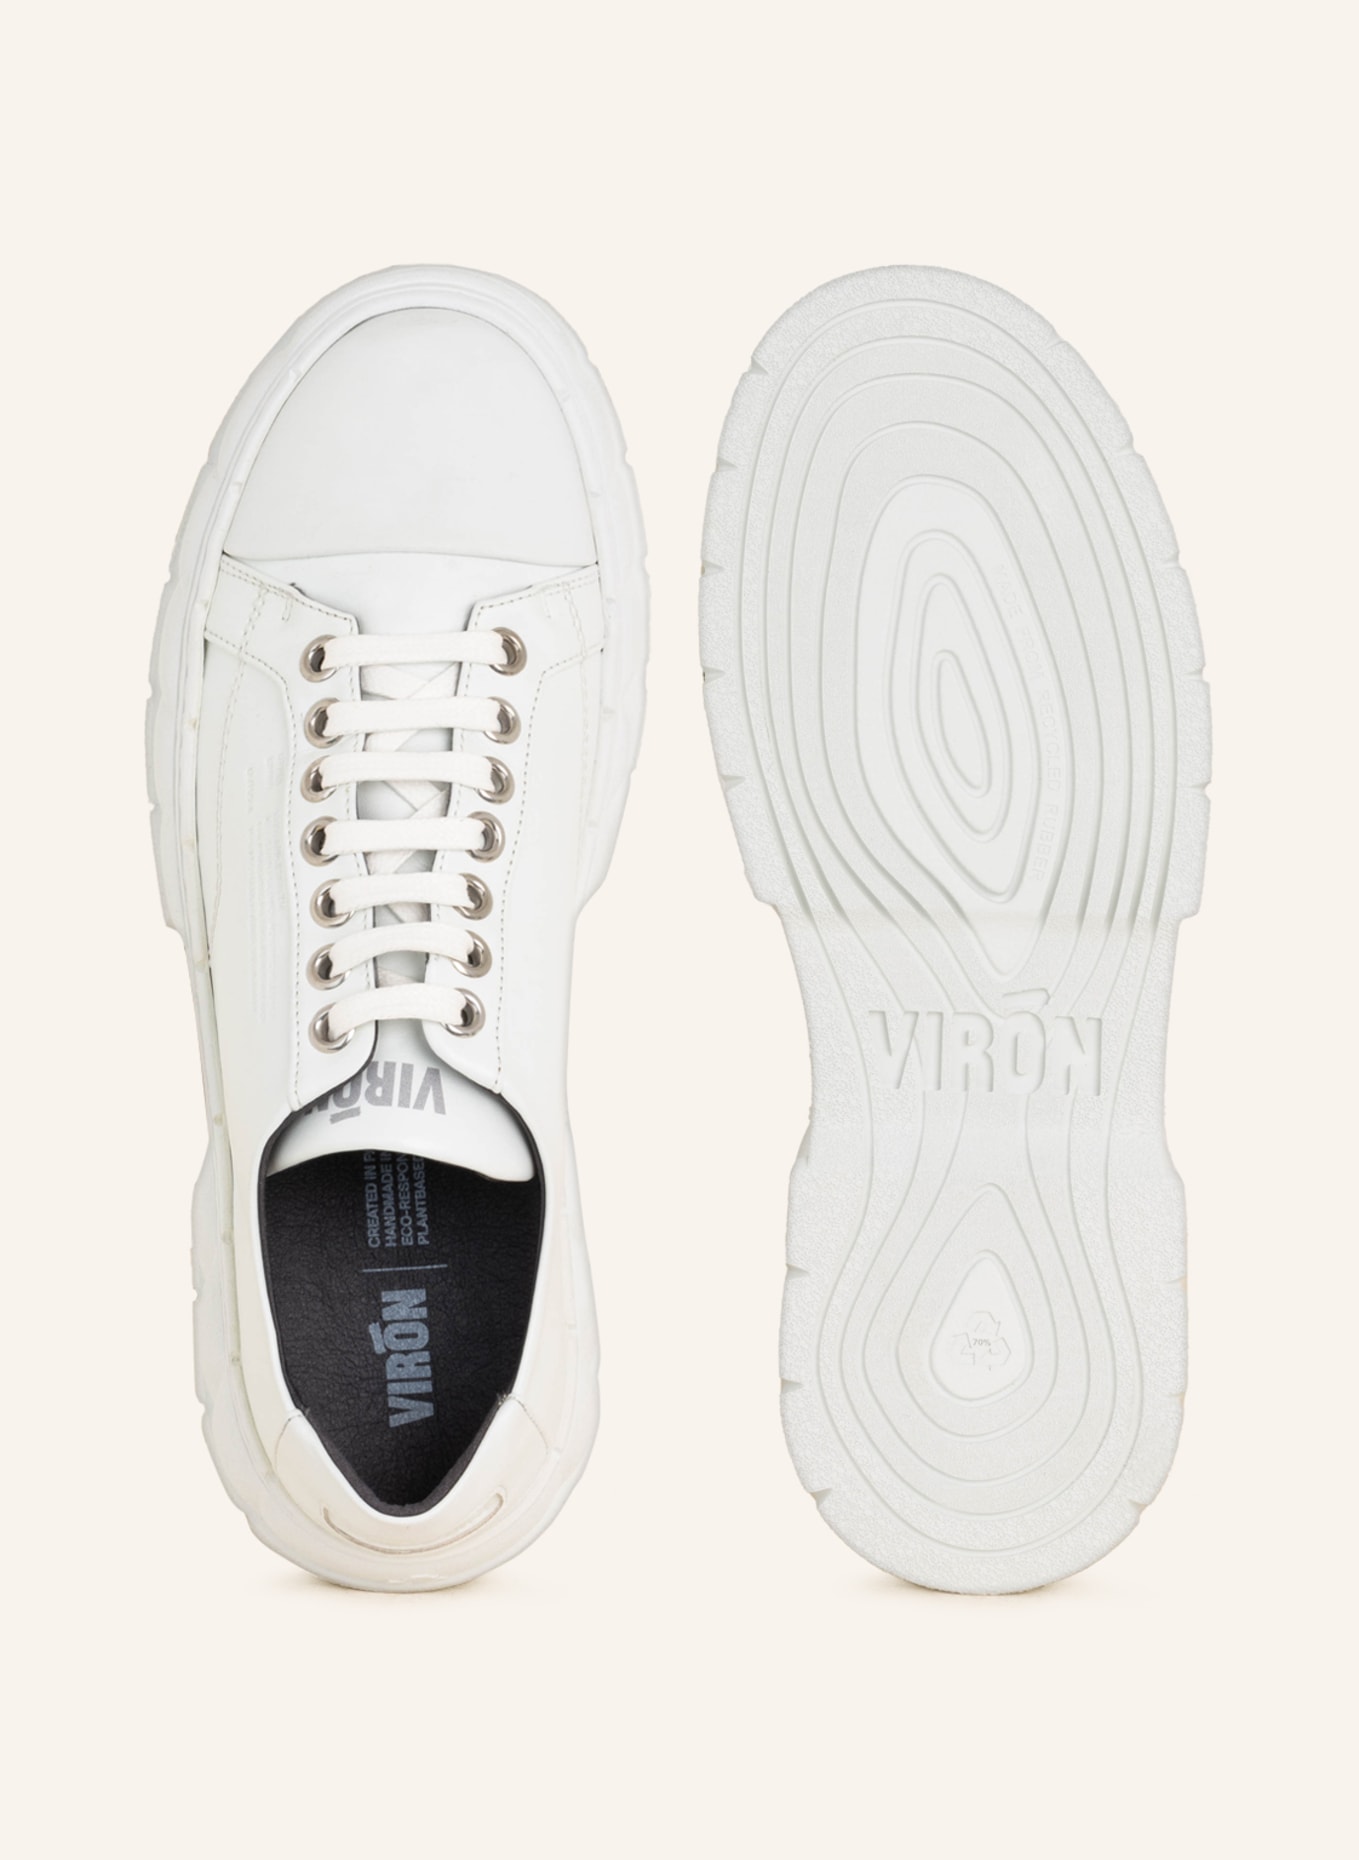 VIRÒN Sneakers 1968 APPLESKIN, Color: WHITE (Image 5)